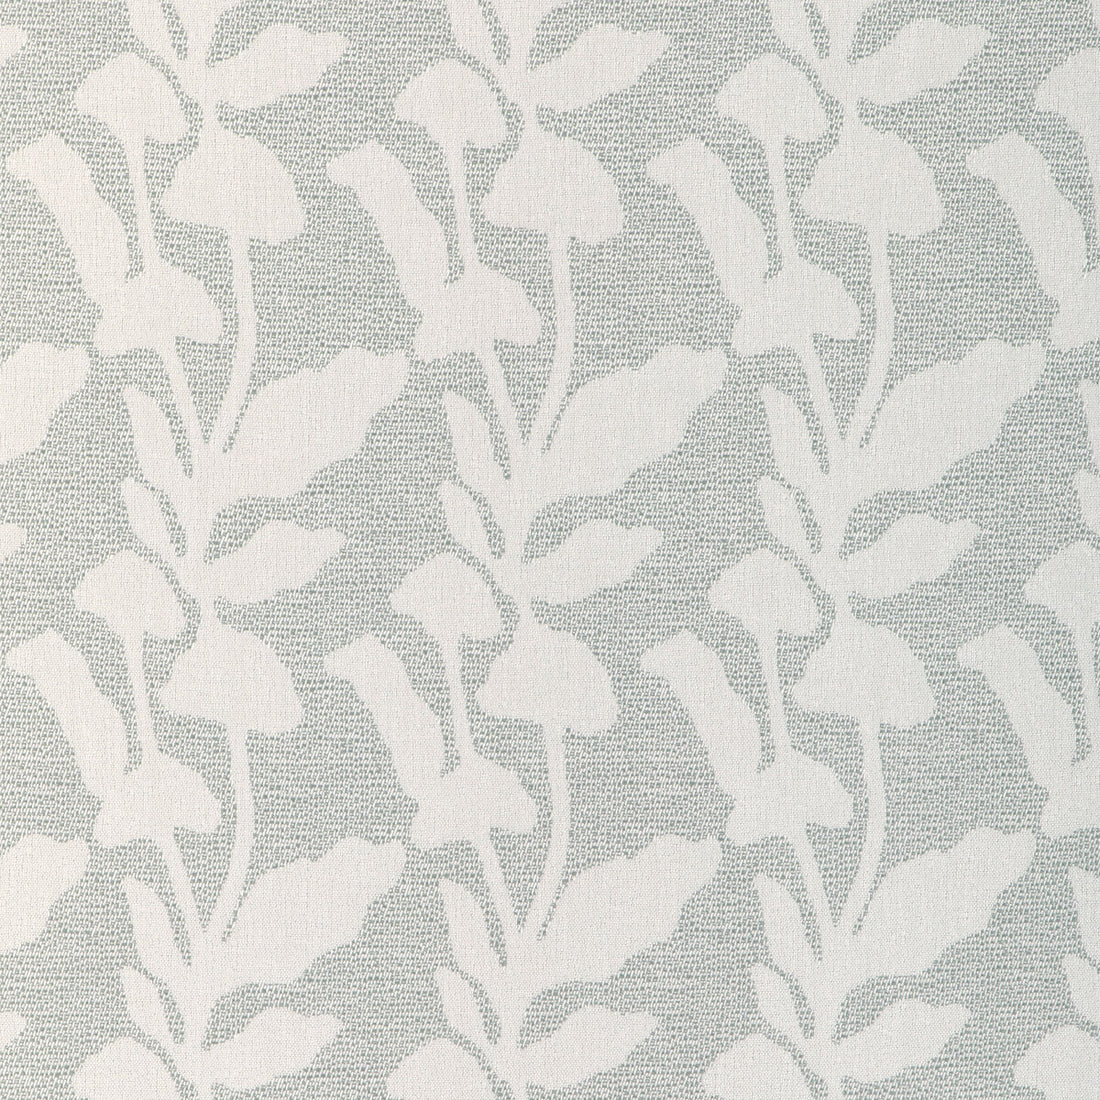 Rose Cliff fabric in seaglass color - pattern 36937.15.0 - by Kravet Couture in the Riviera collection